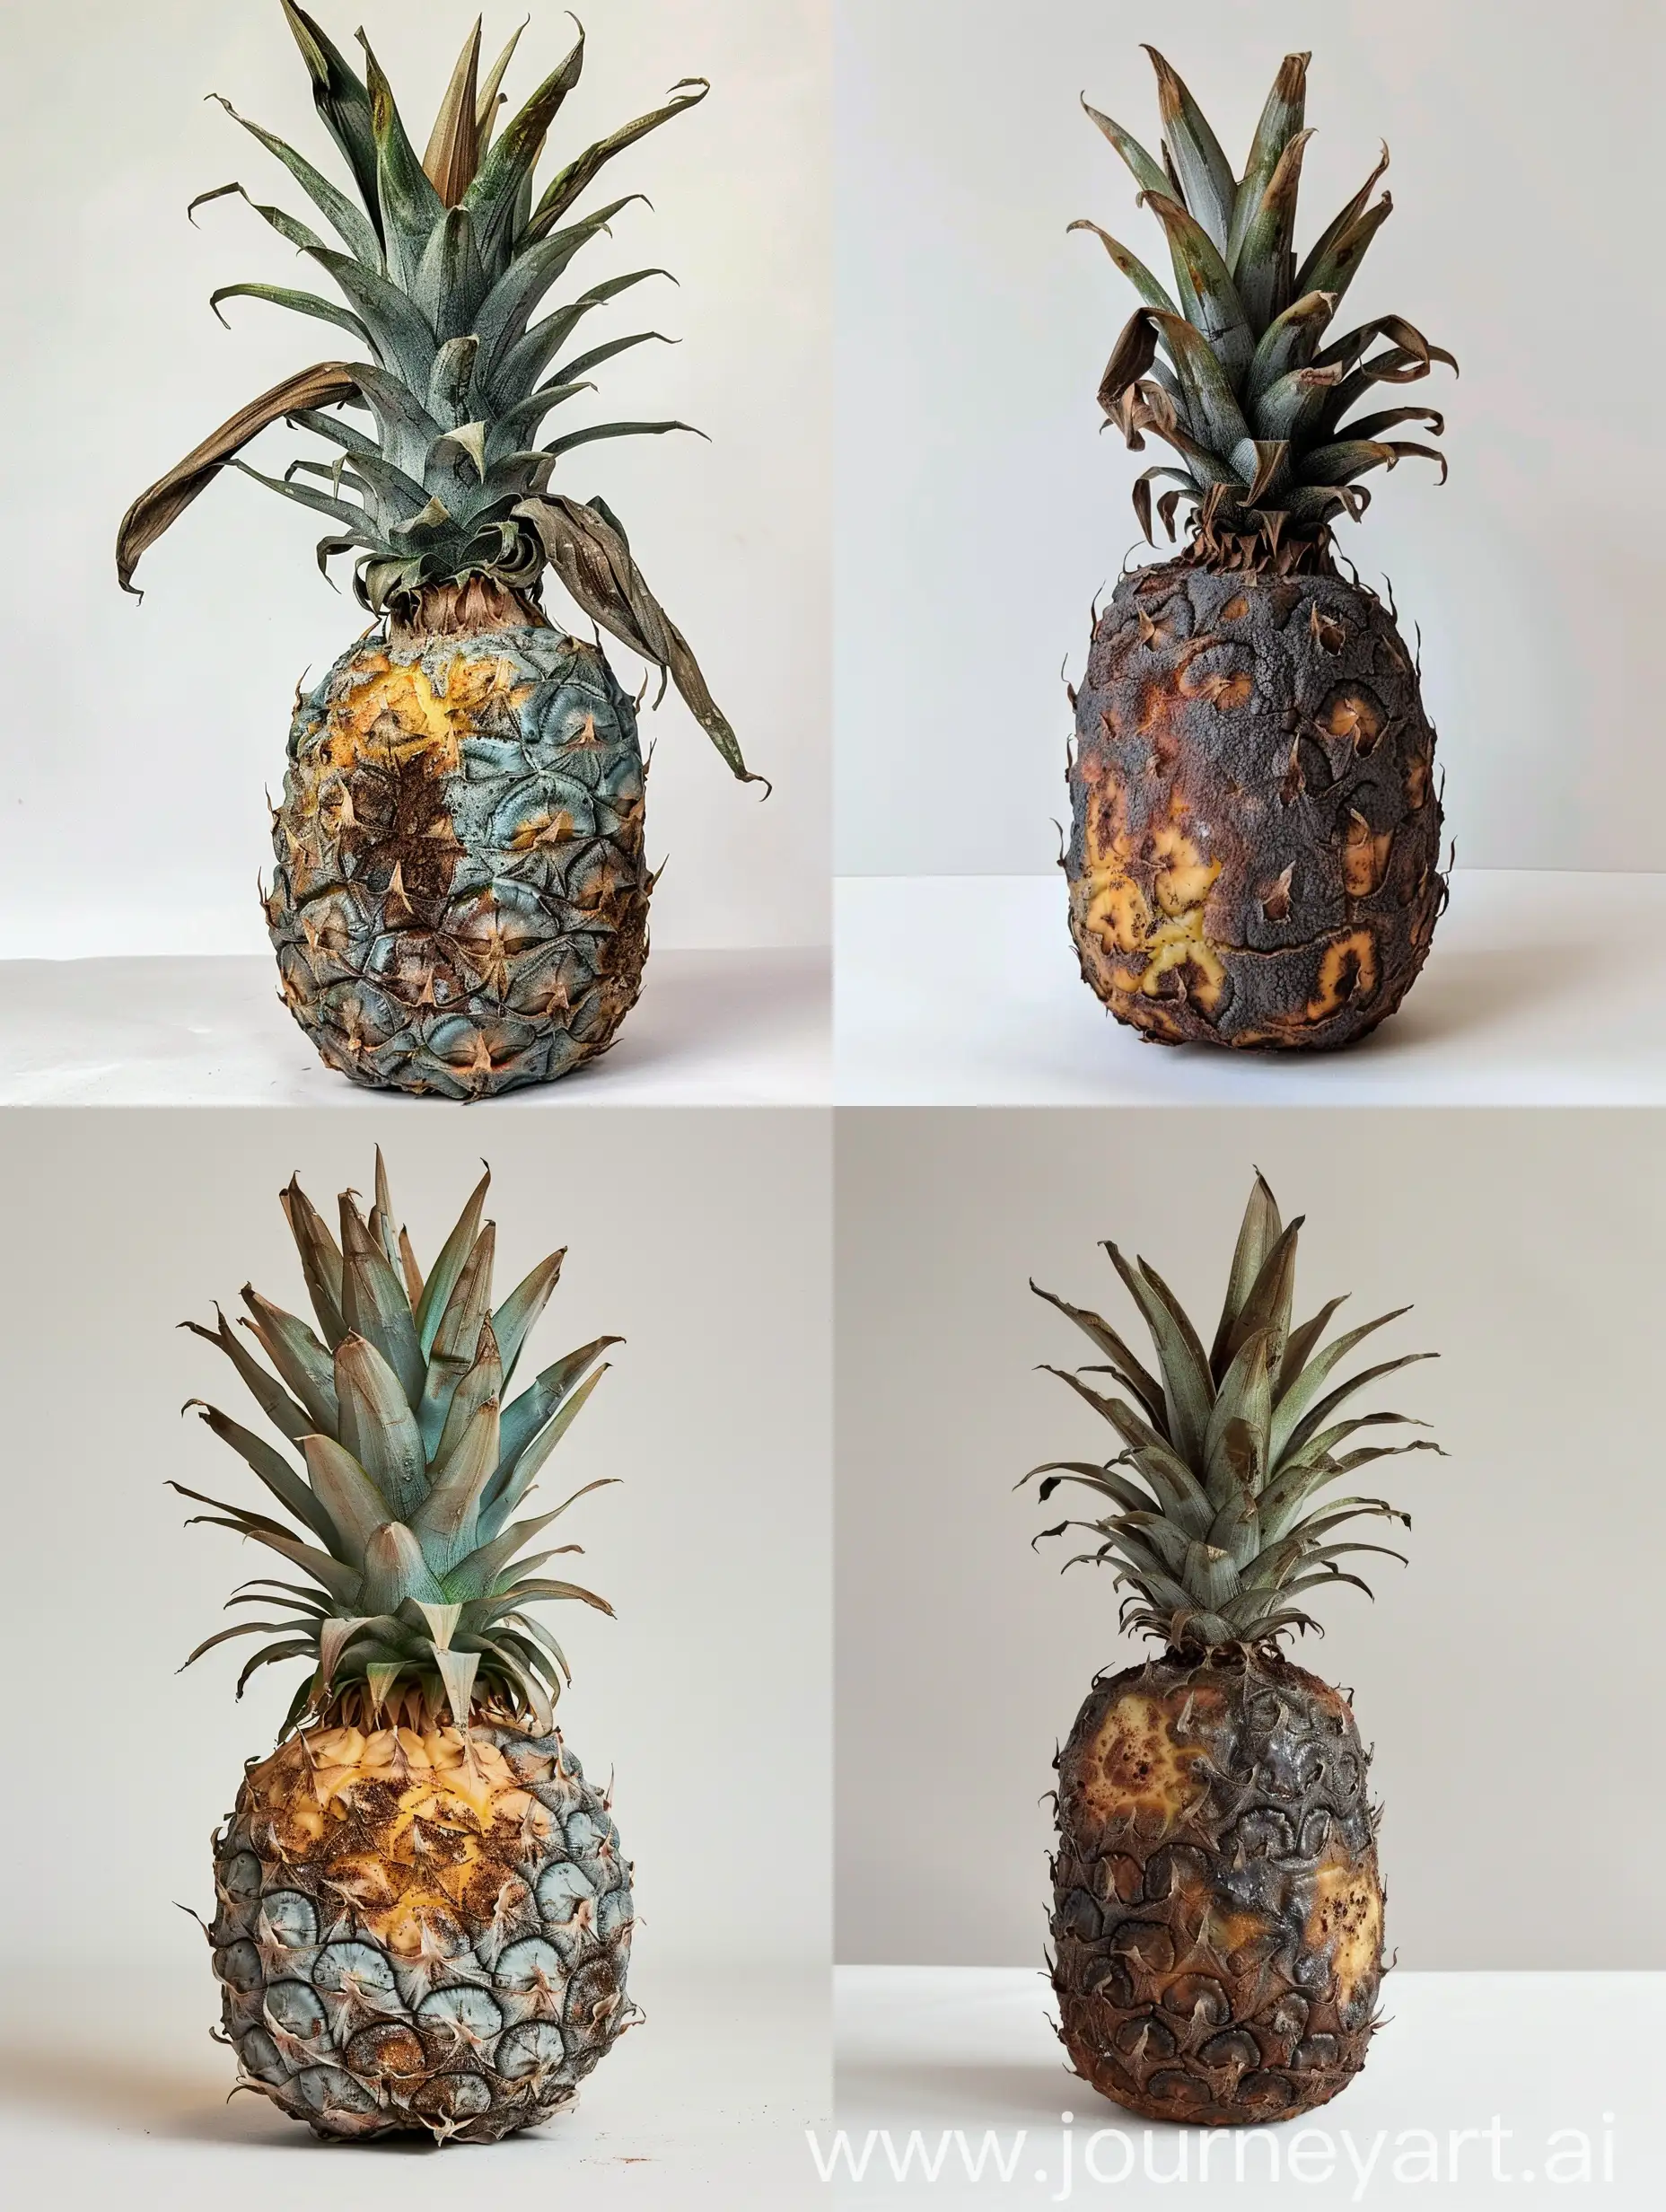 Vintage-Rusty-Pineapple-Art-with-a-34-Aspect-Ratio